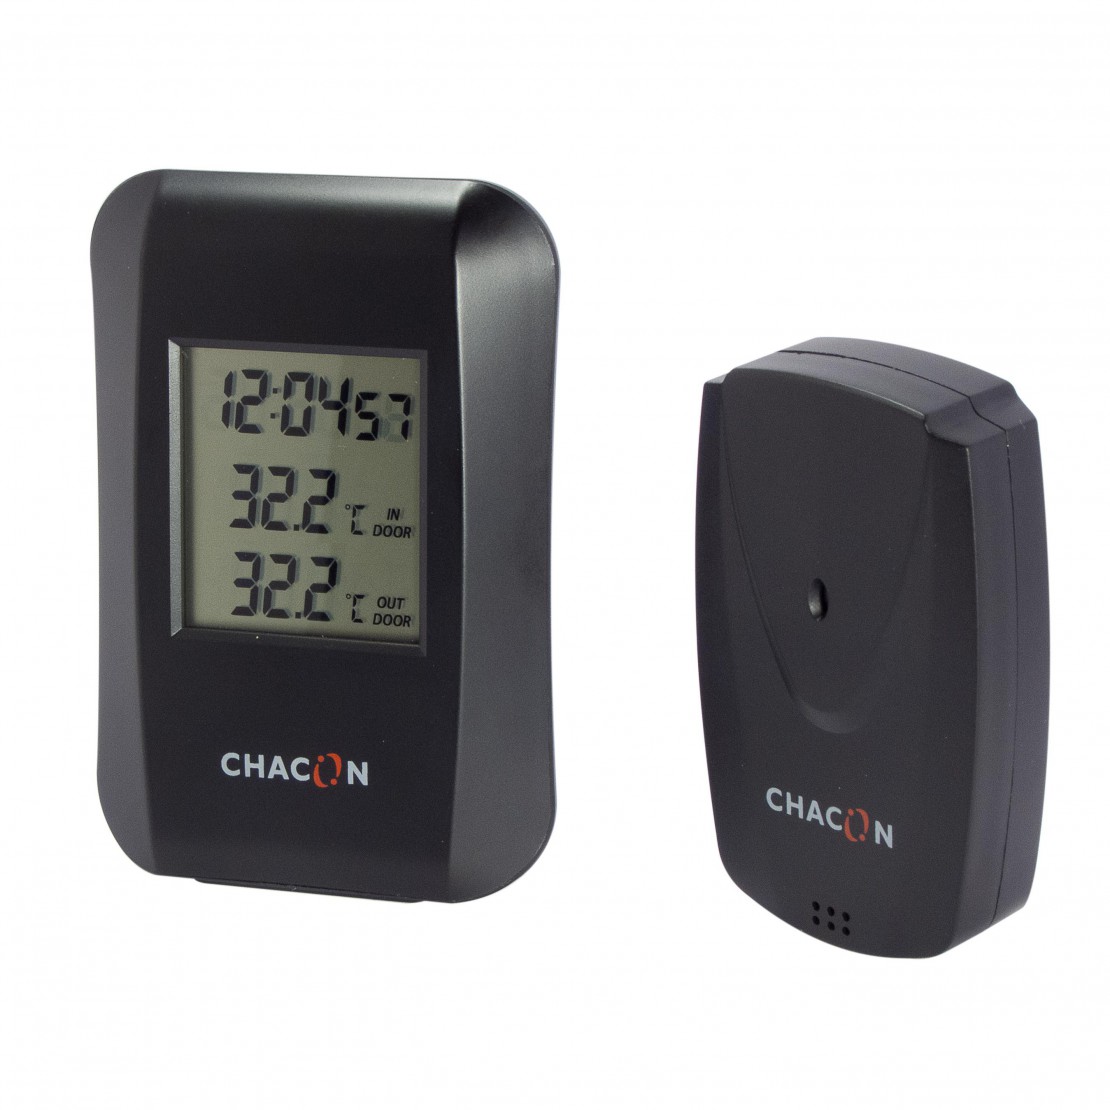 https://chacon.com/9089-large_default/wireless-inside-outside-thermometer.jpg